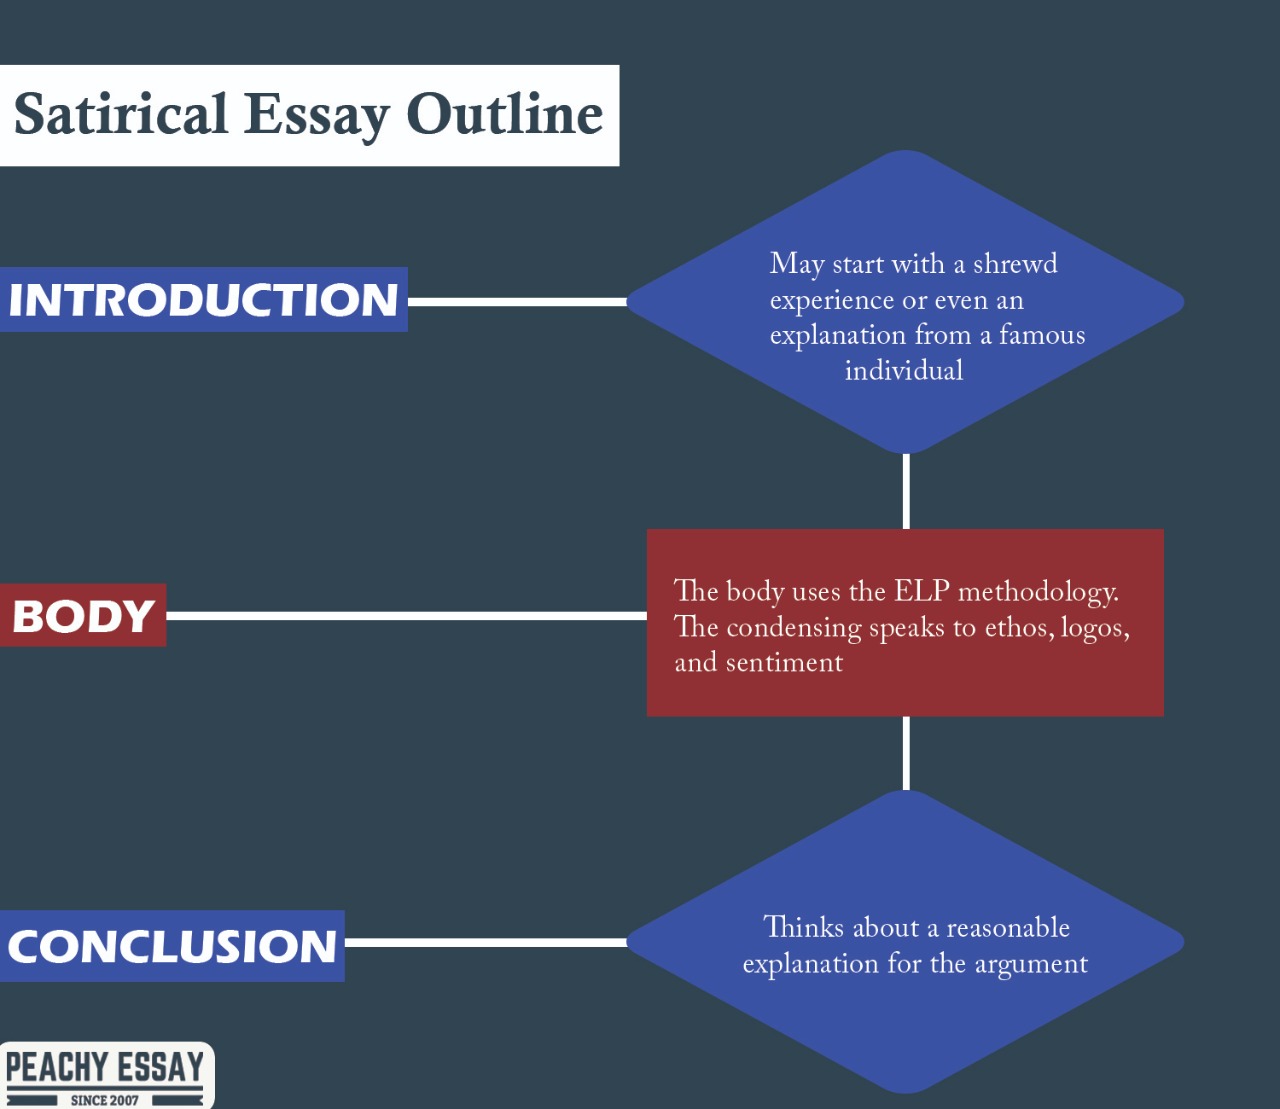 how to conclude a satirical essay